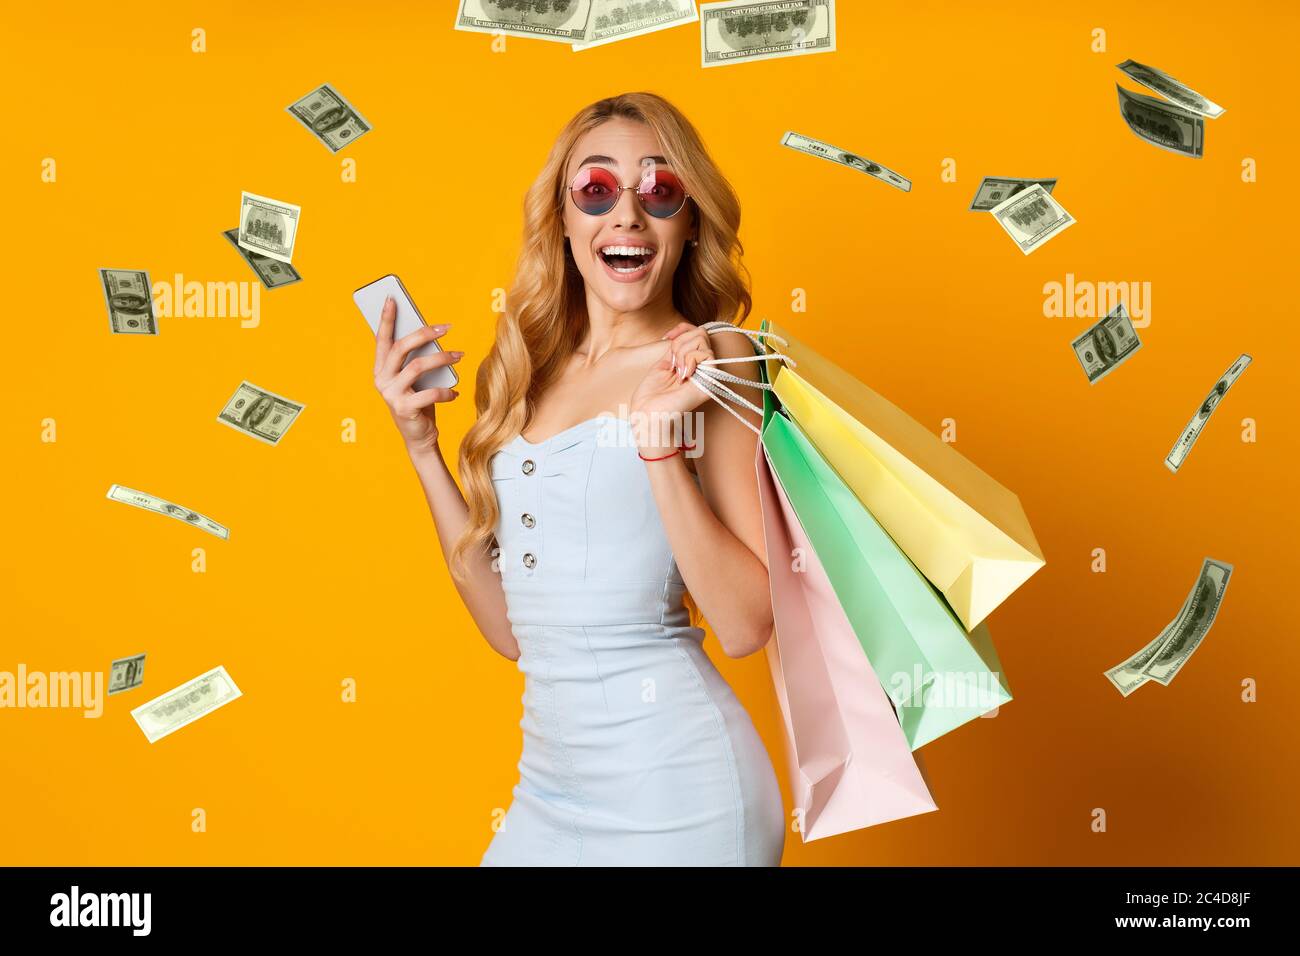 Cashback. Collage Of Woman With Smartphone And Shopping Bags Under Money Shower Stock Photo